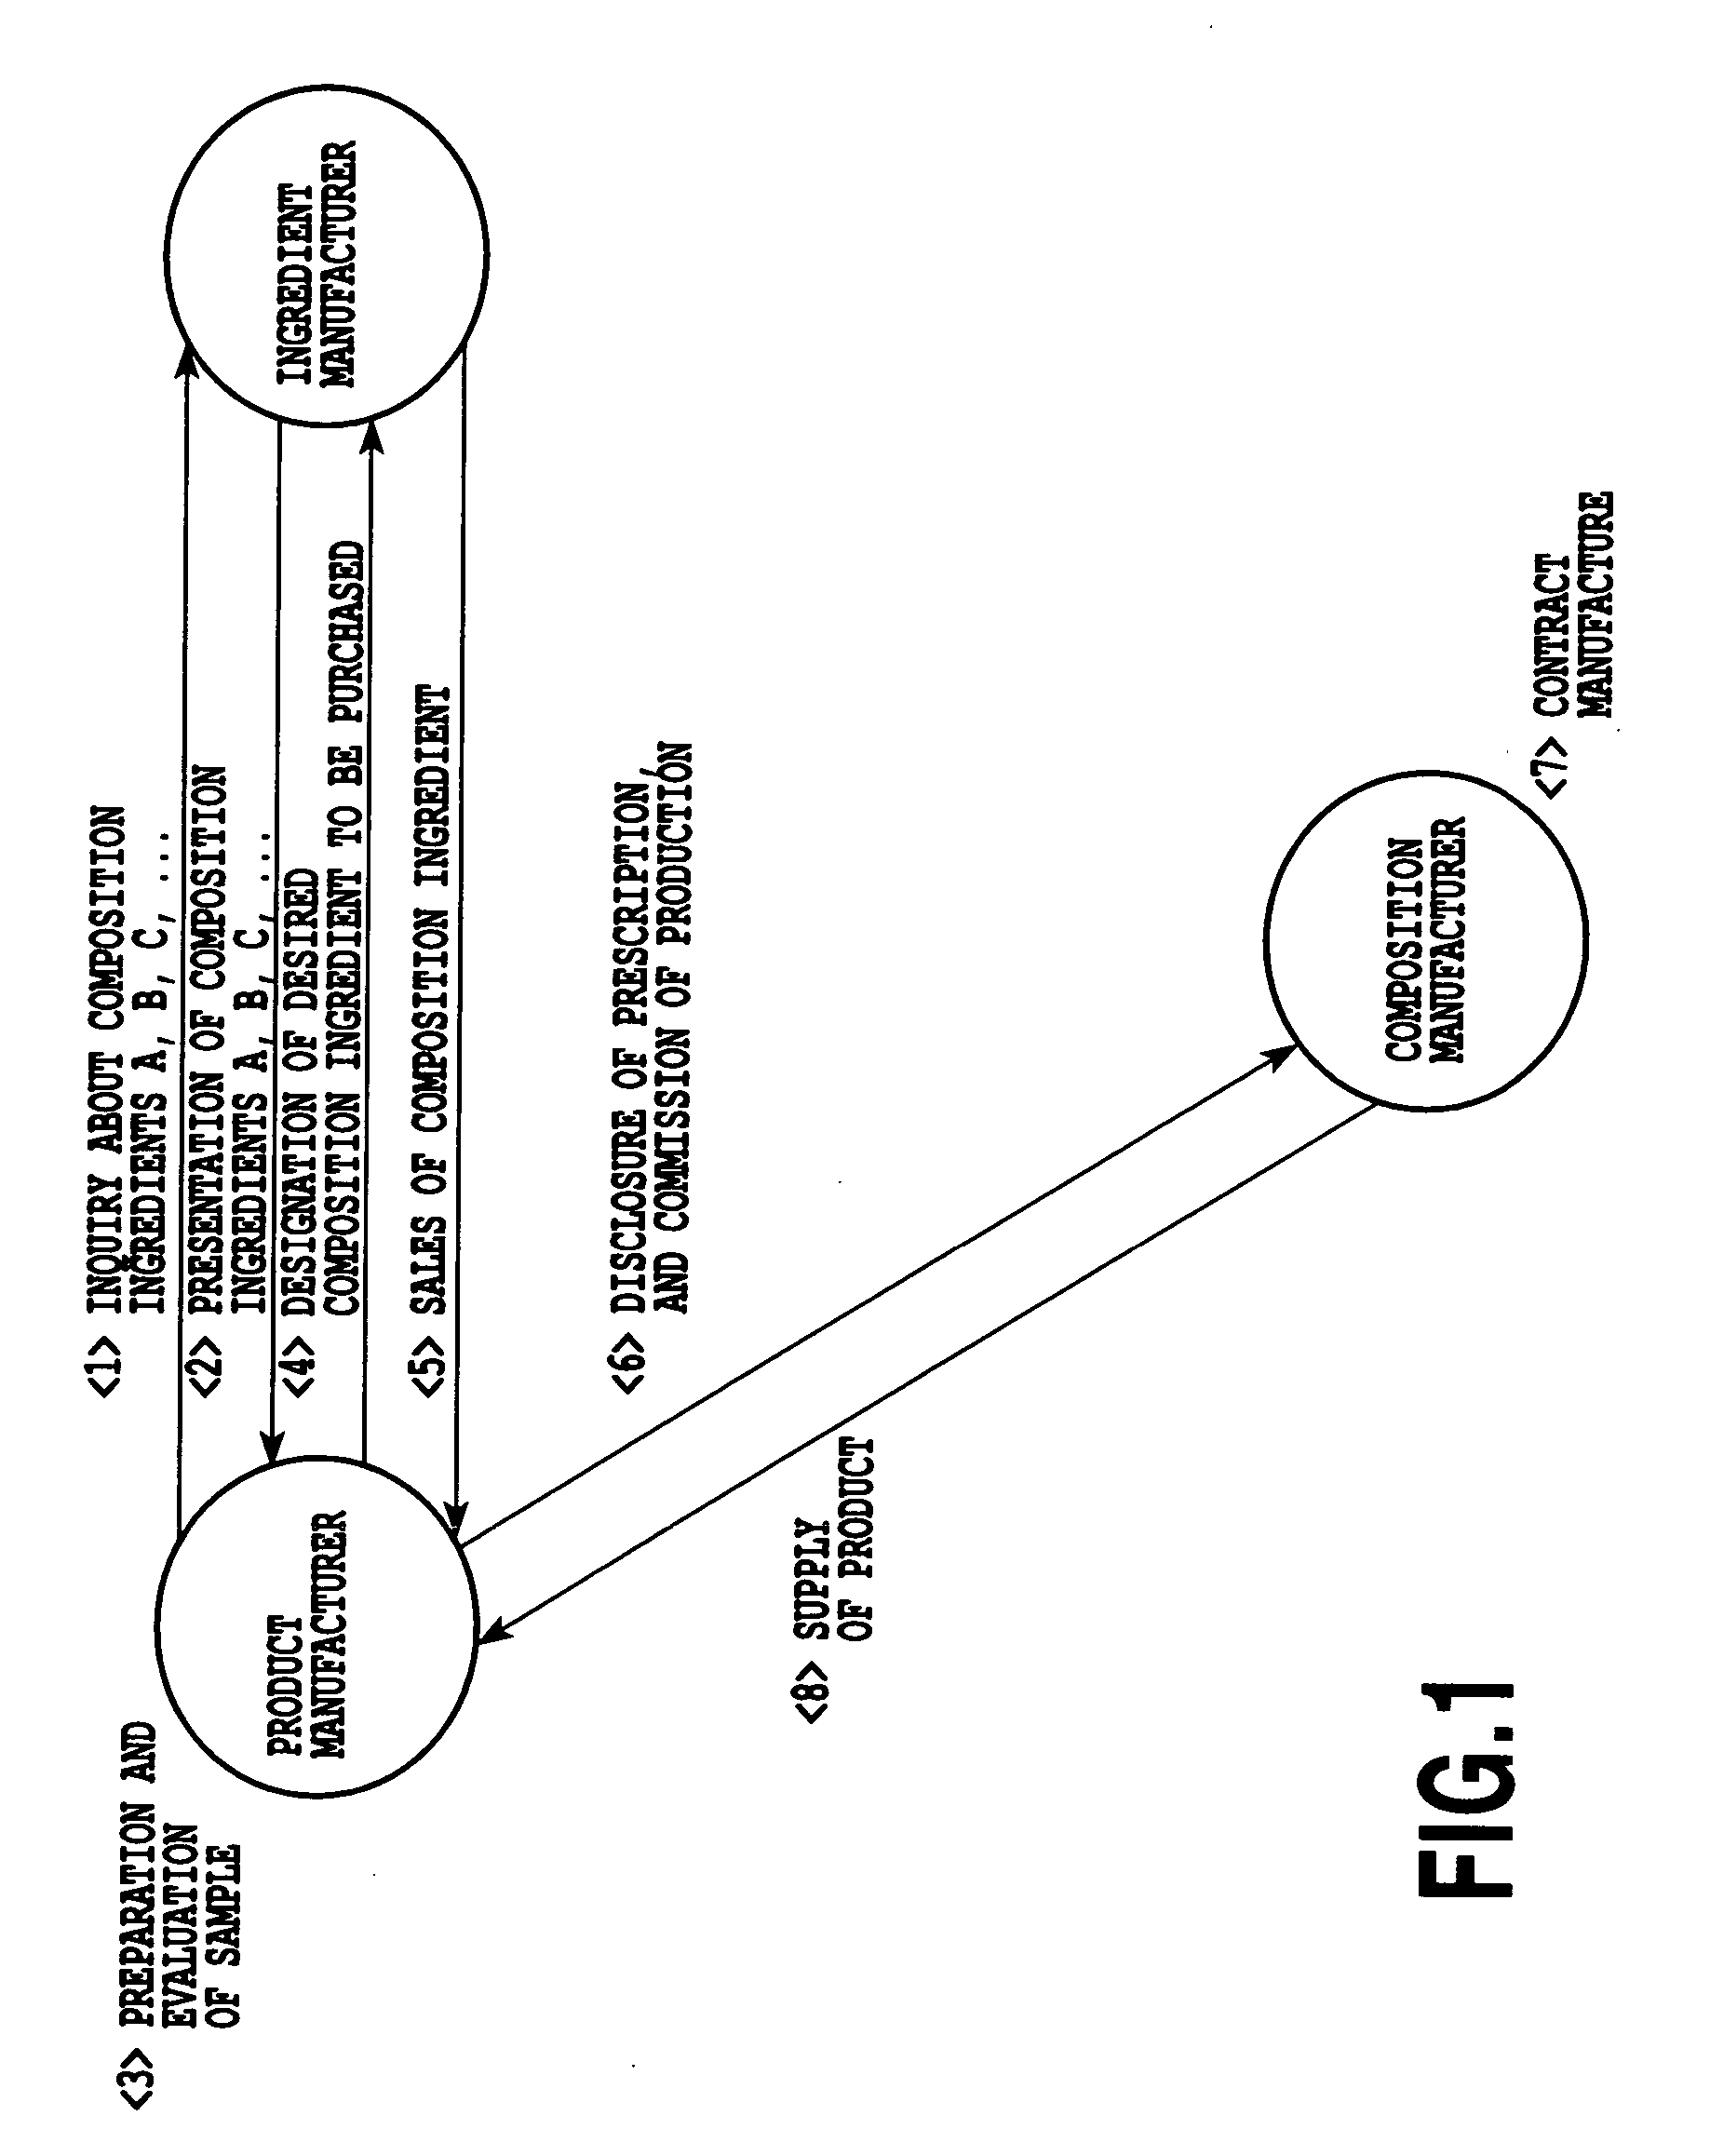 Medicine trial production supporting system